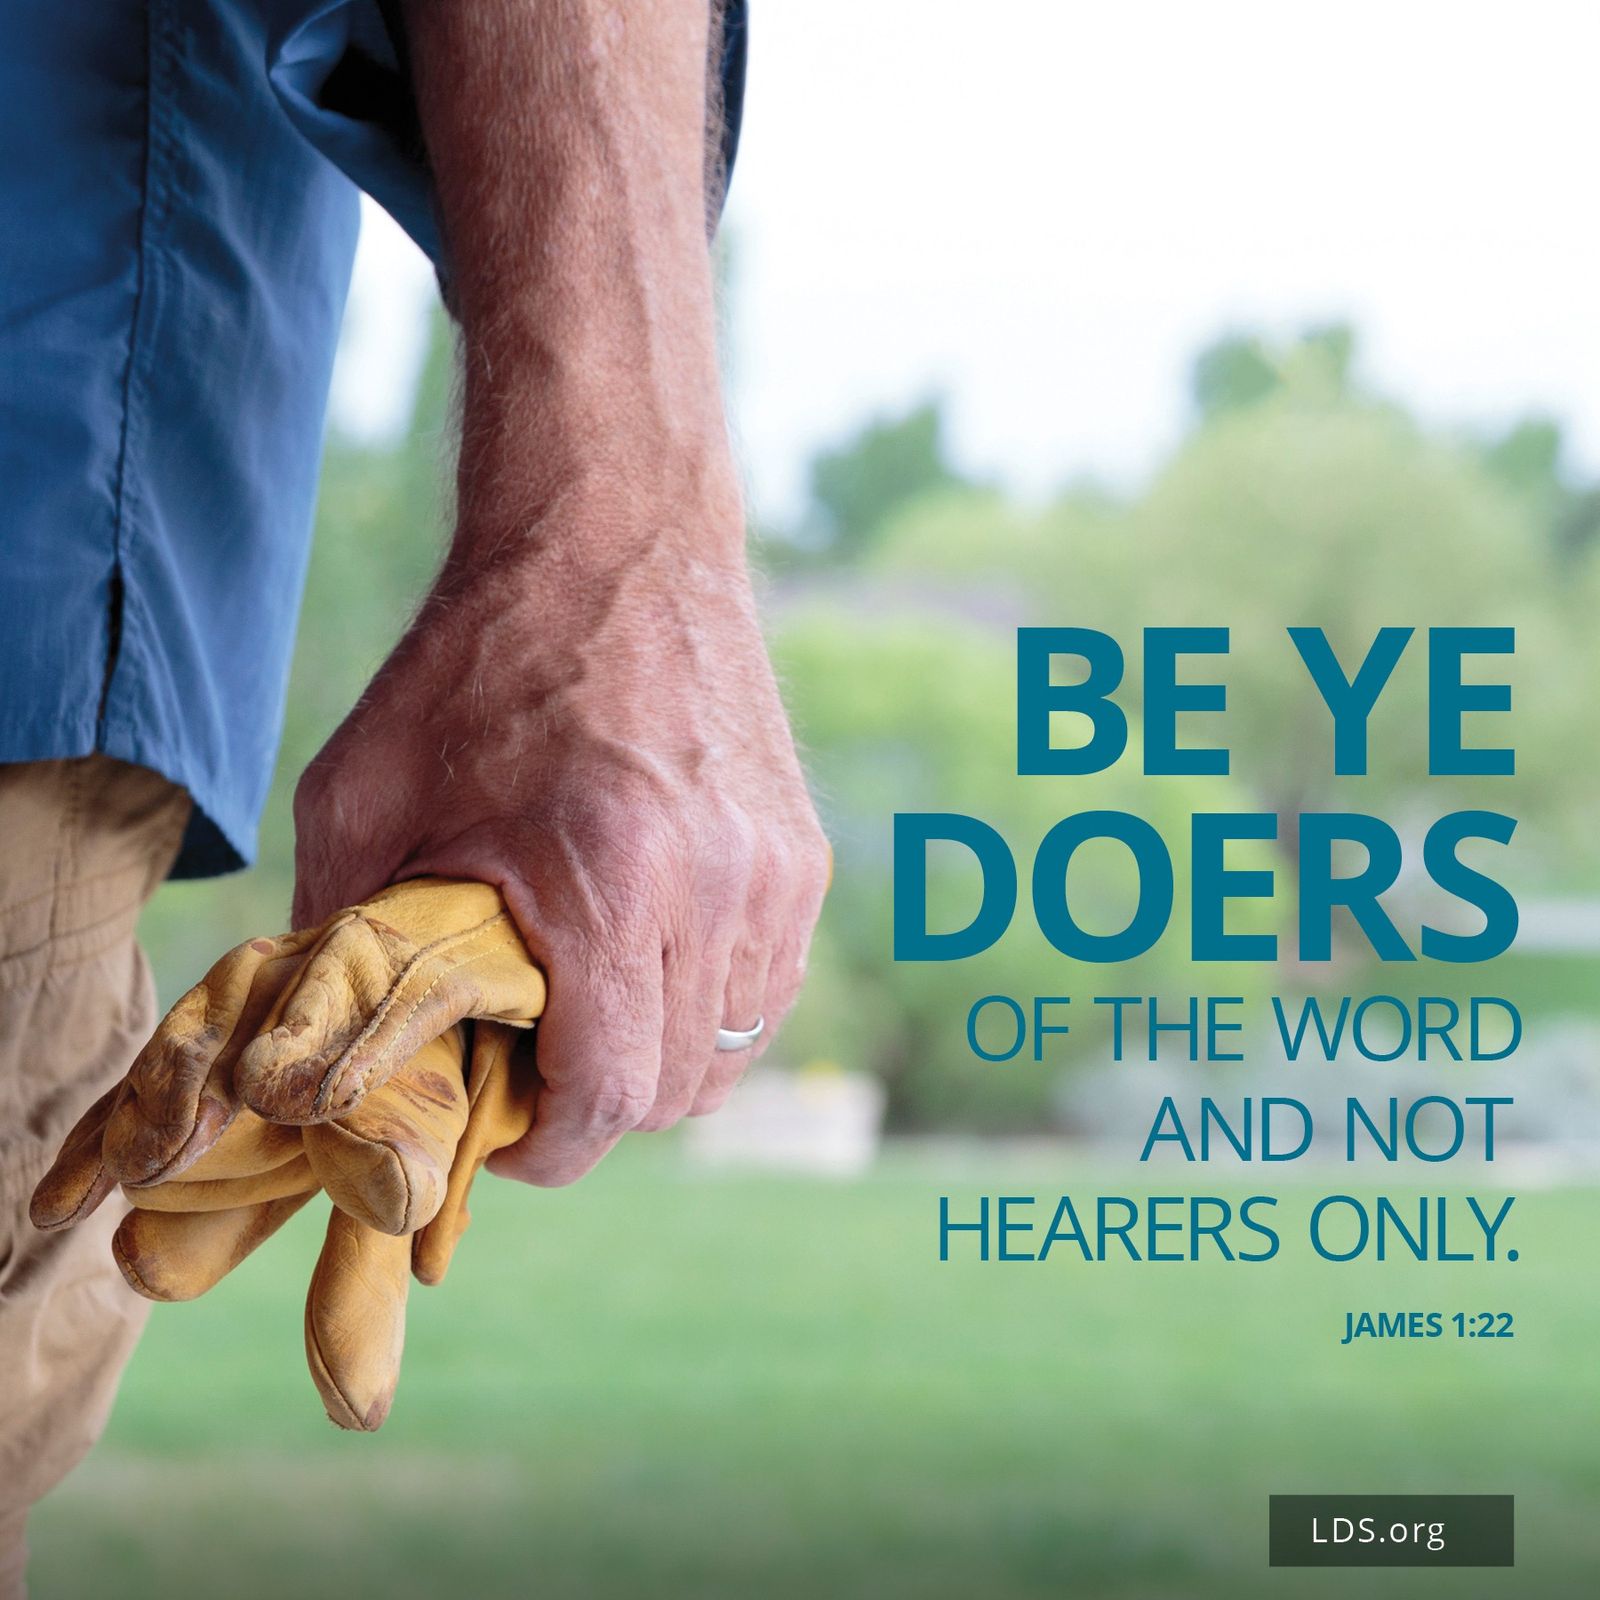 “Be ye doers of the word, and not hearers only.”—James 1:22